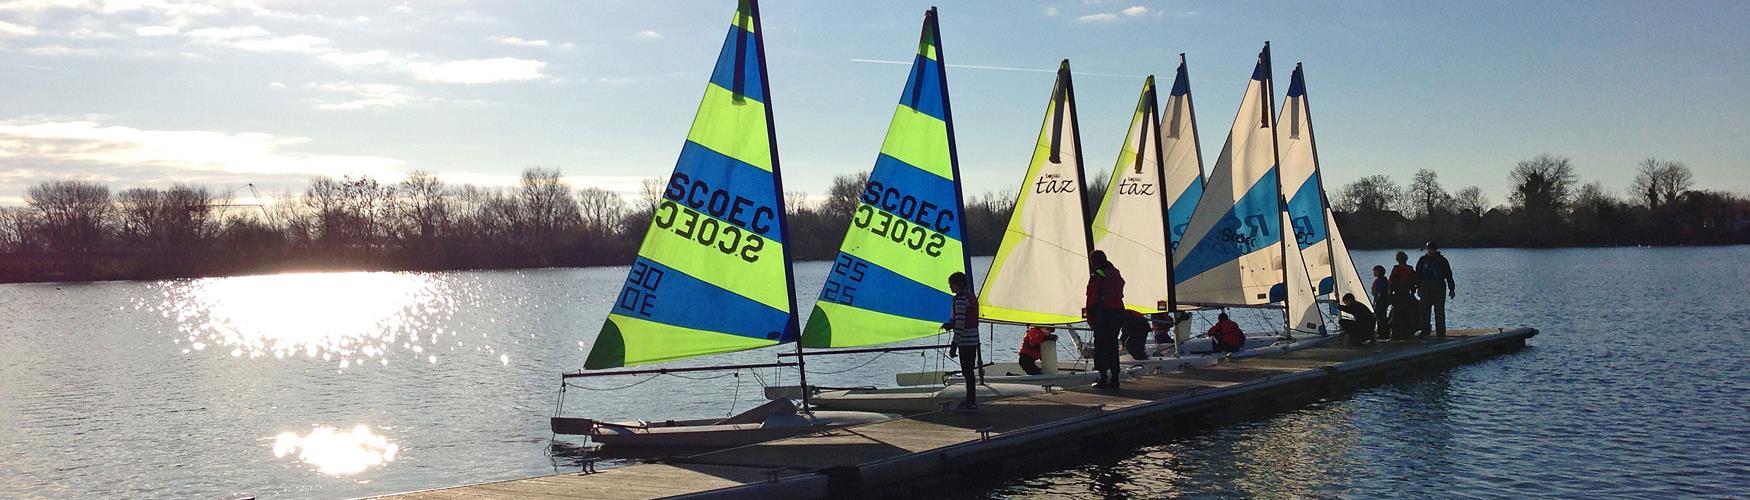 Sailing at Cotswold Water Park